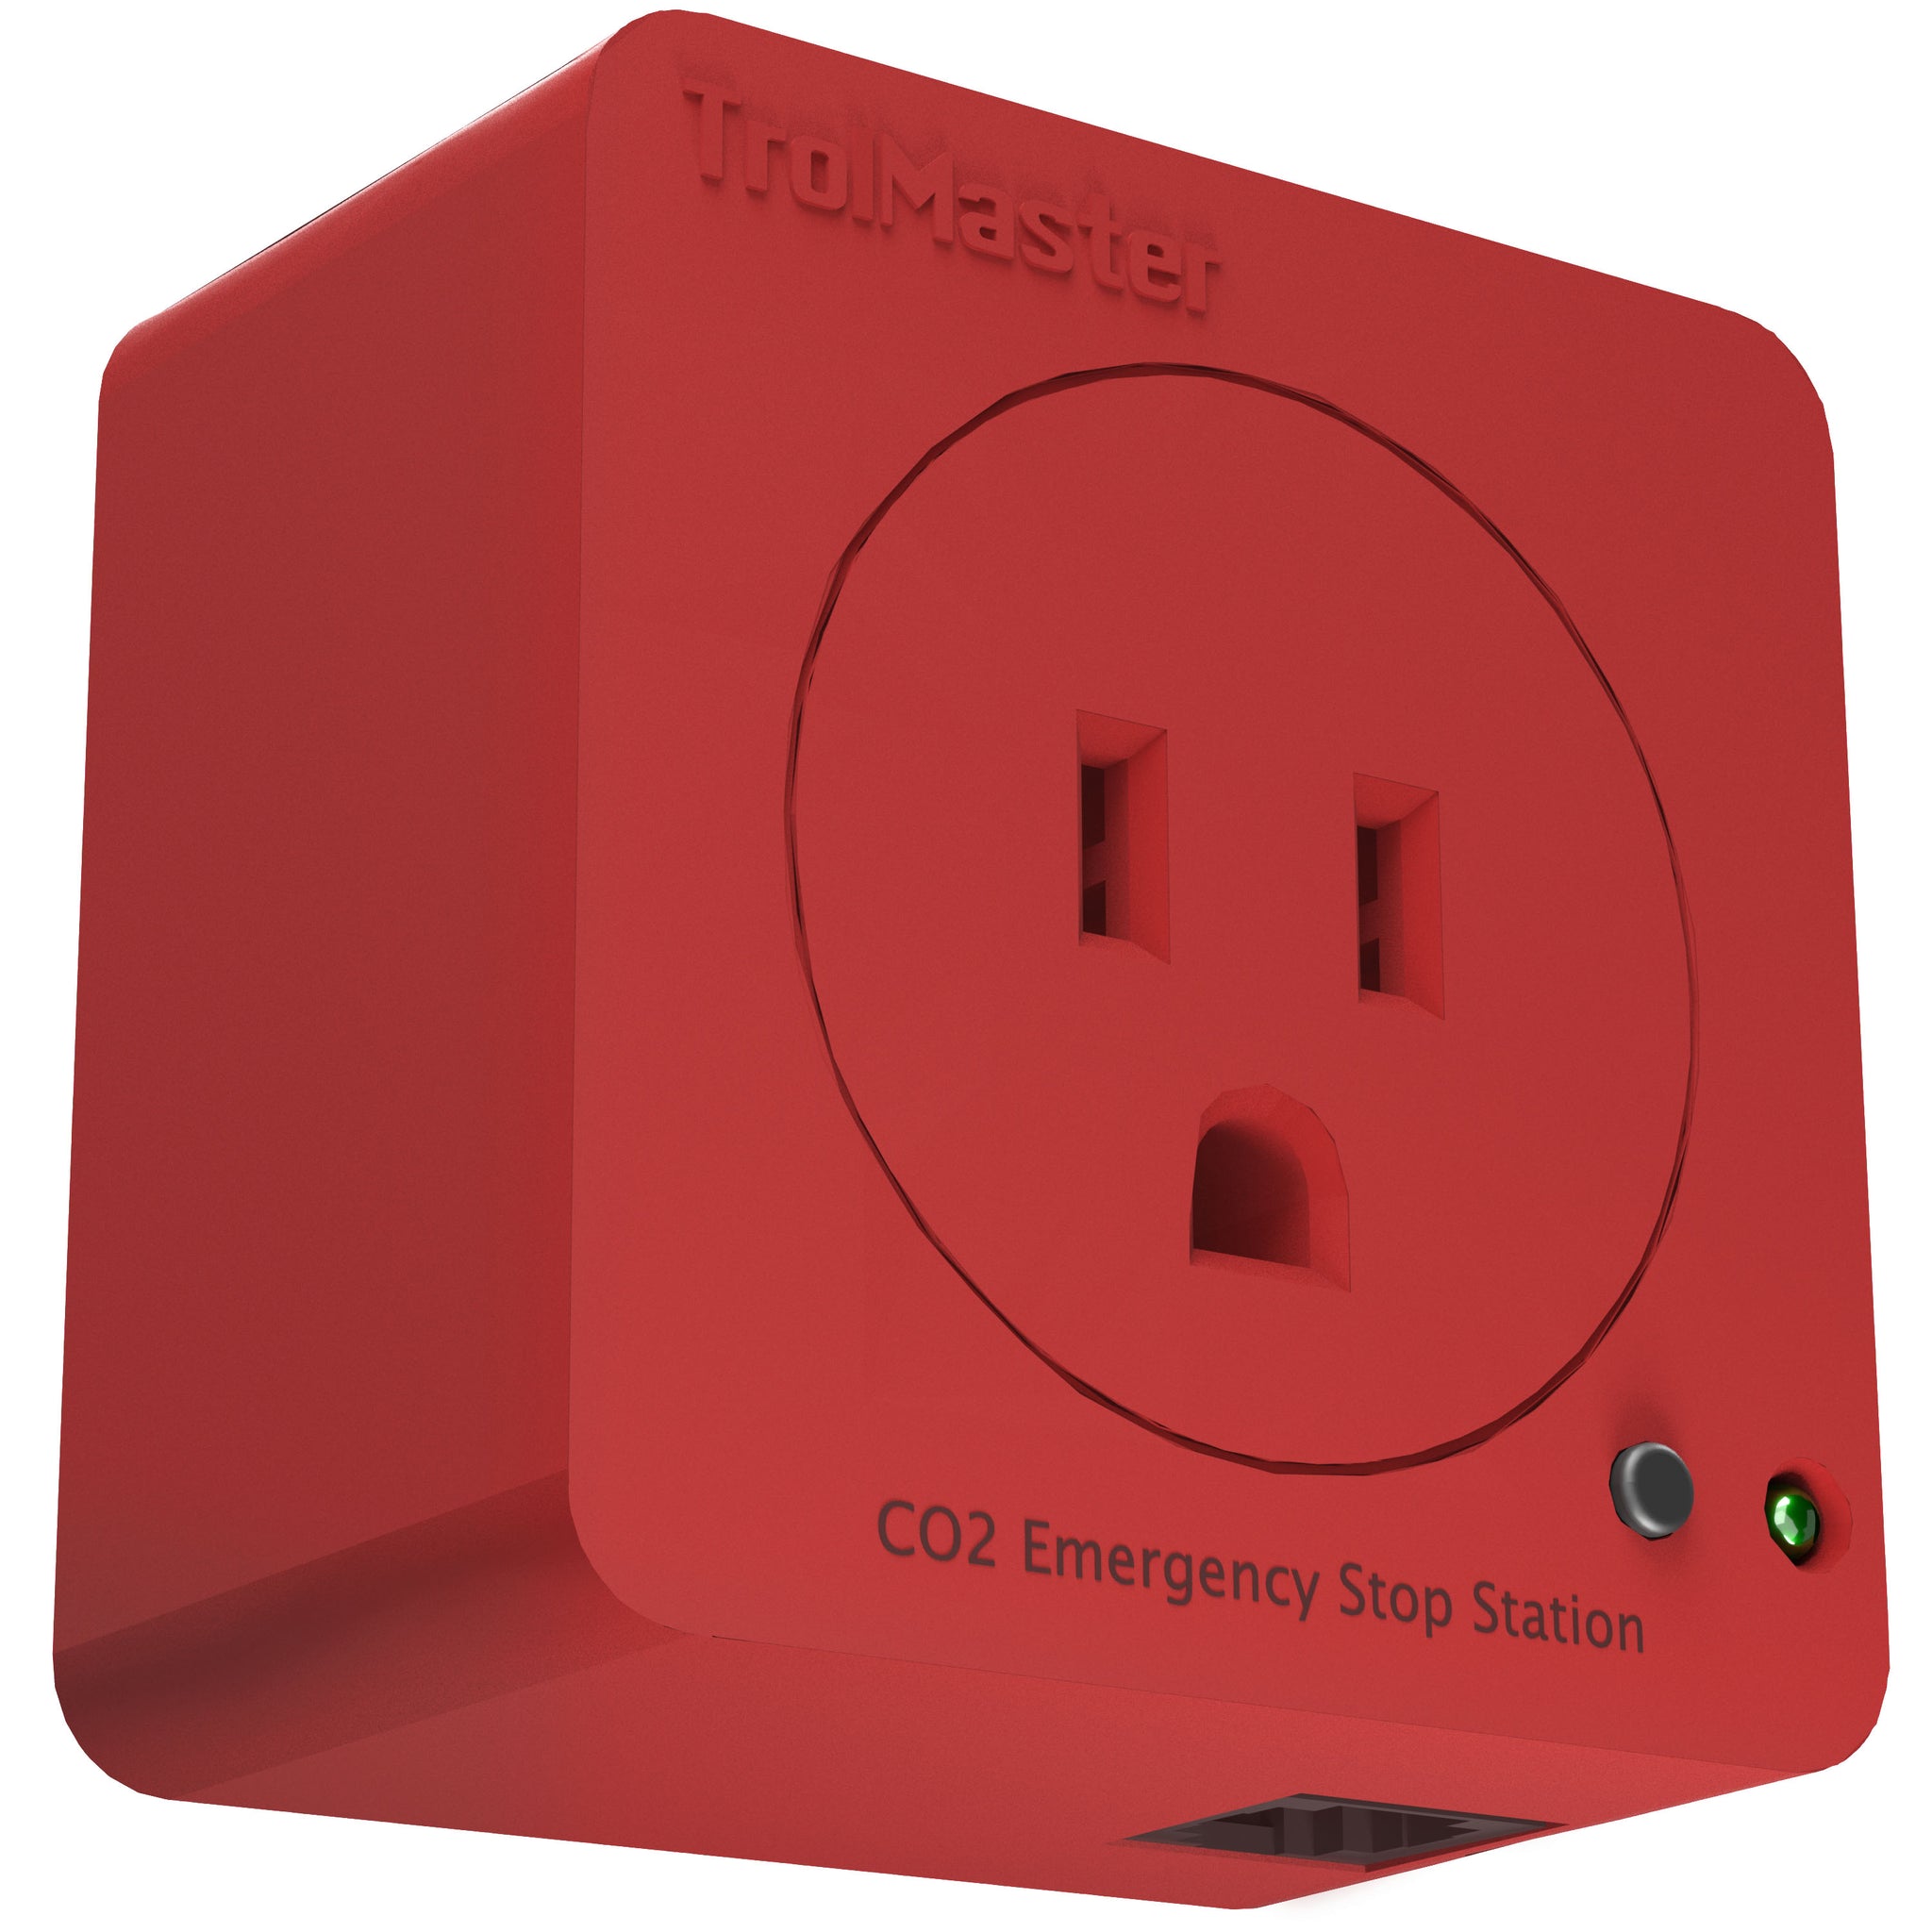 CO2 Emergency Stop Station